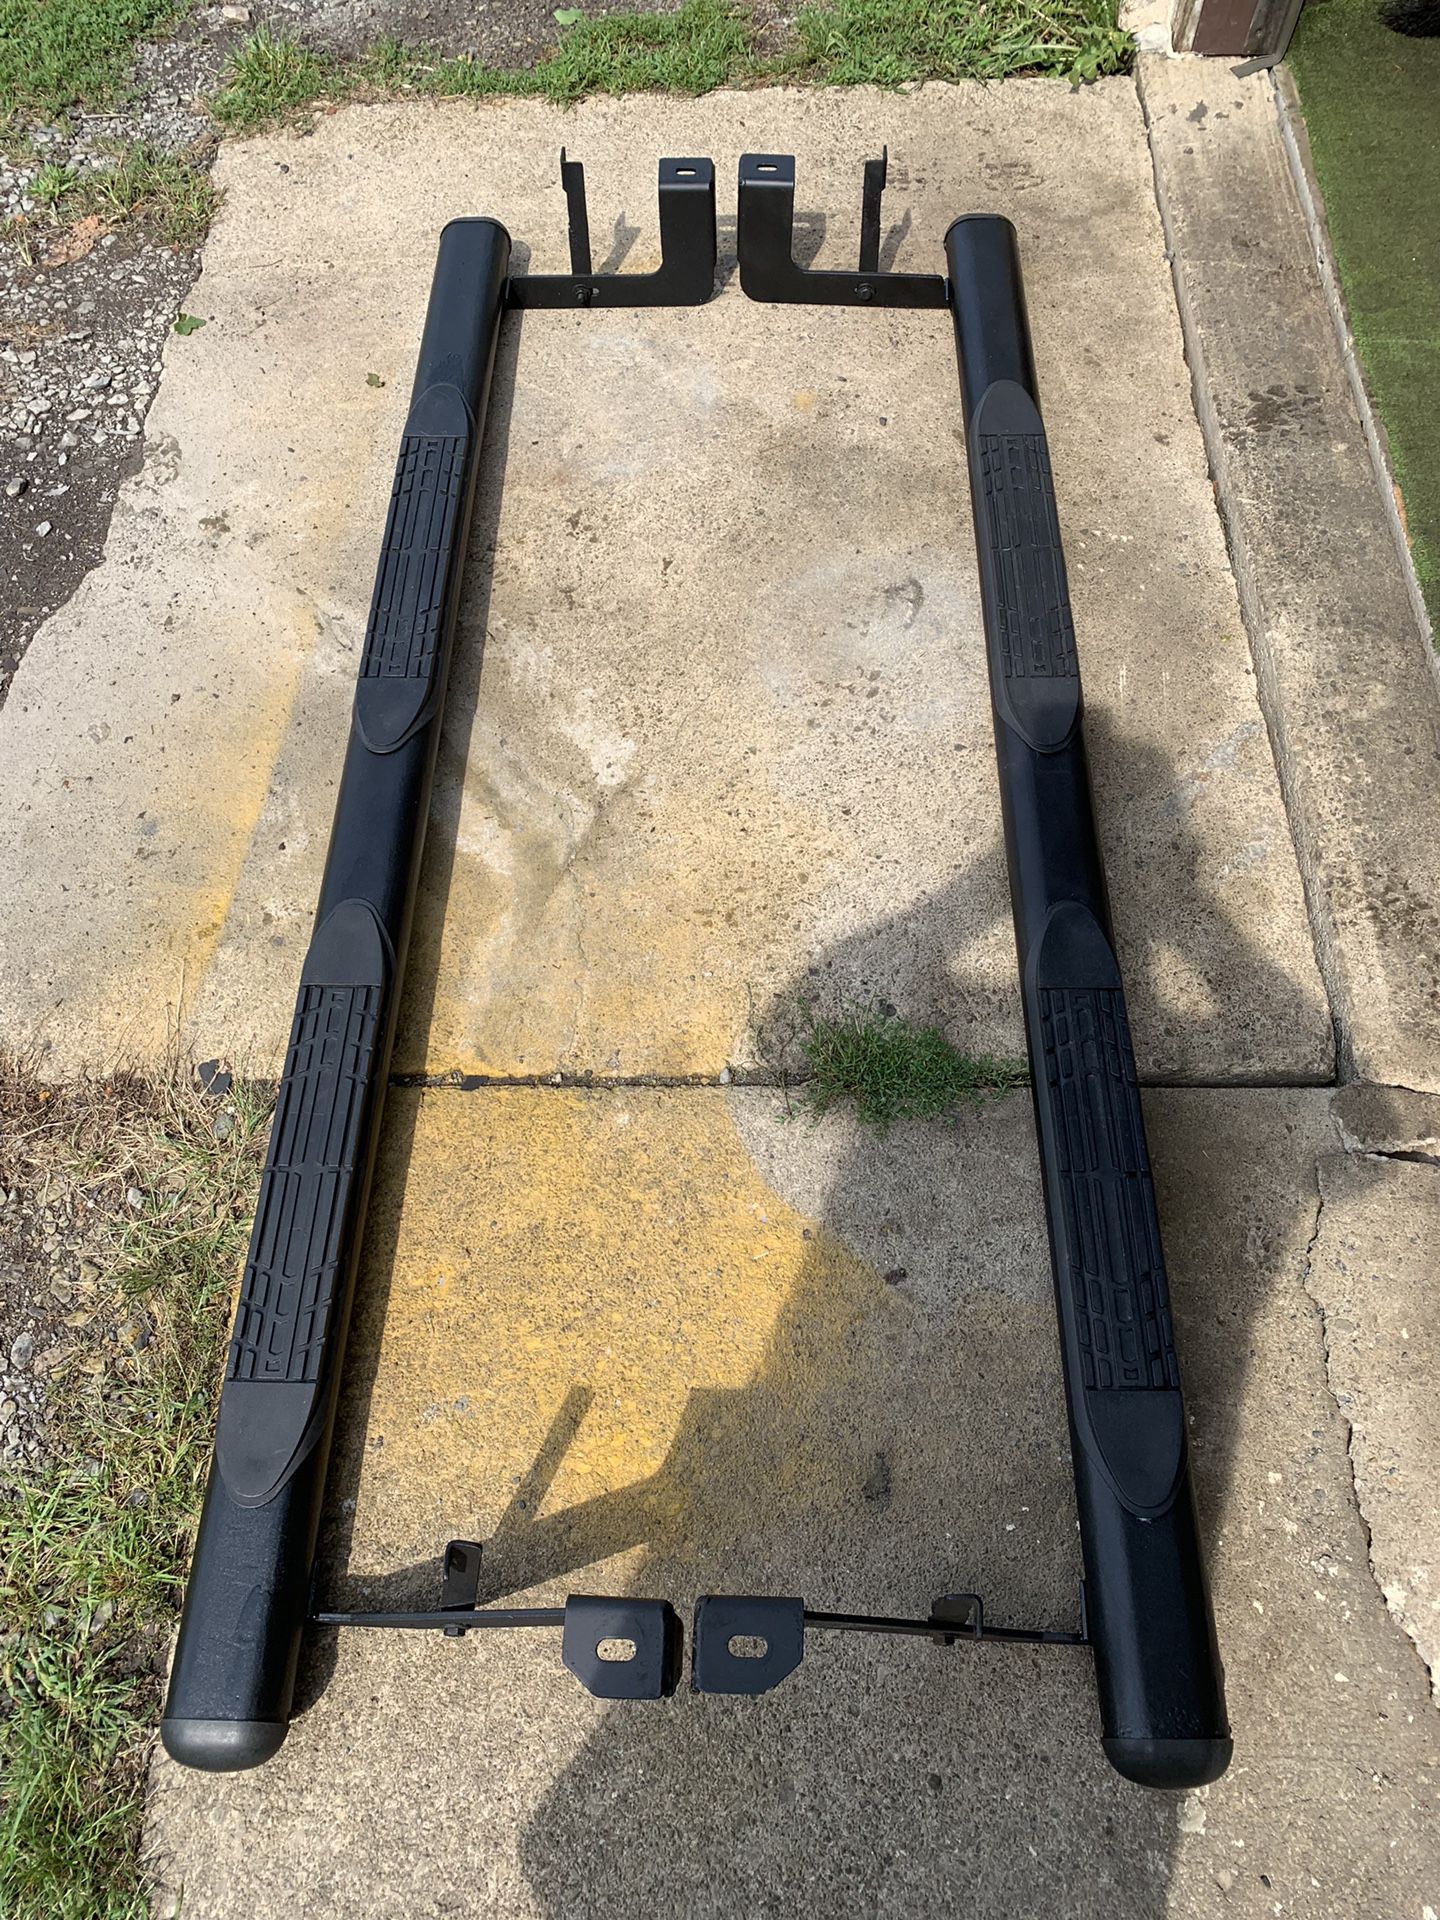 Very good Condition step rails. Came off a 2005 Ram Quad Cab. 77 inches long.